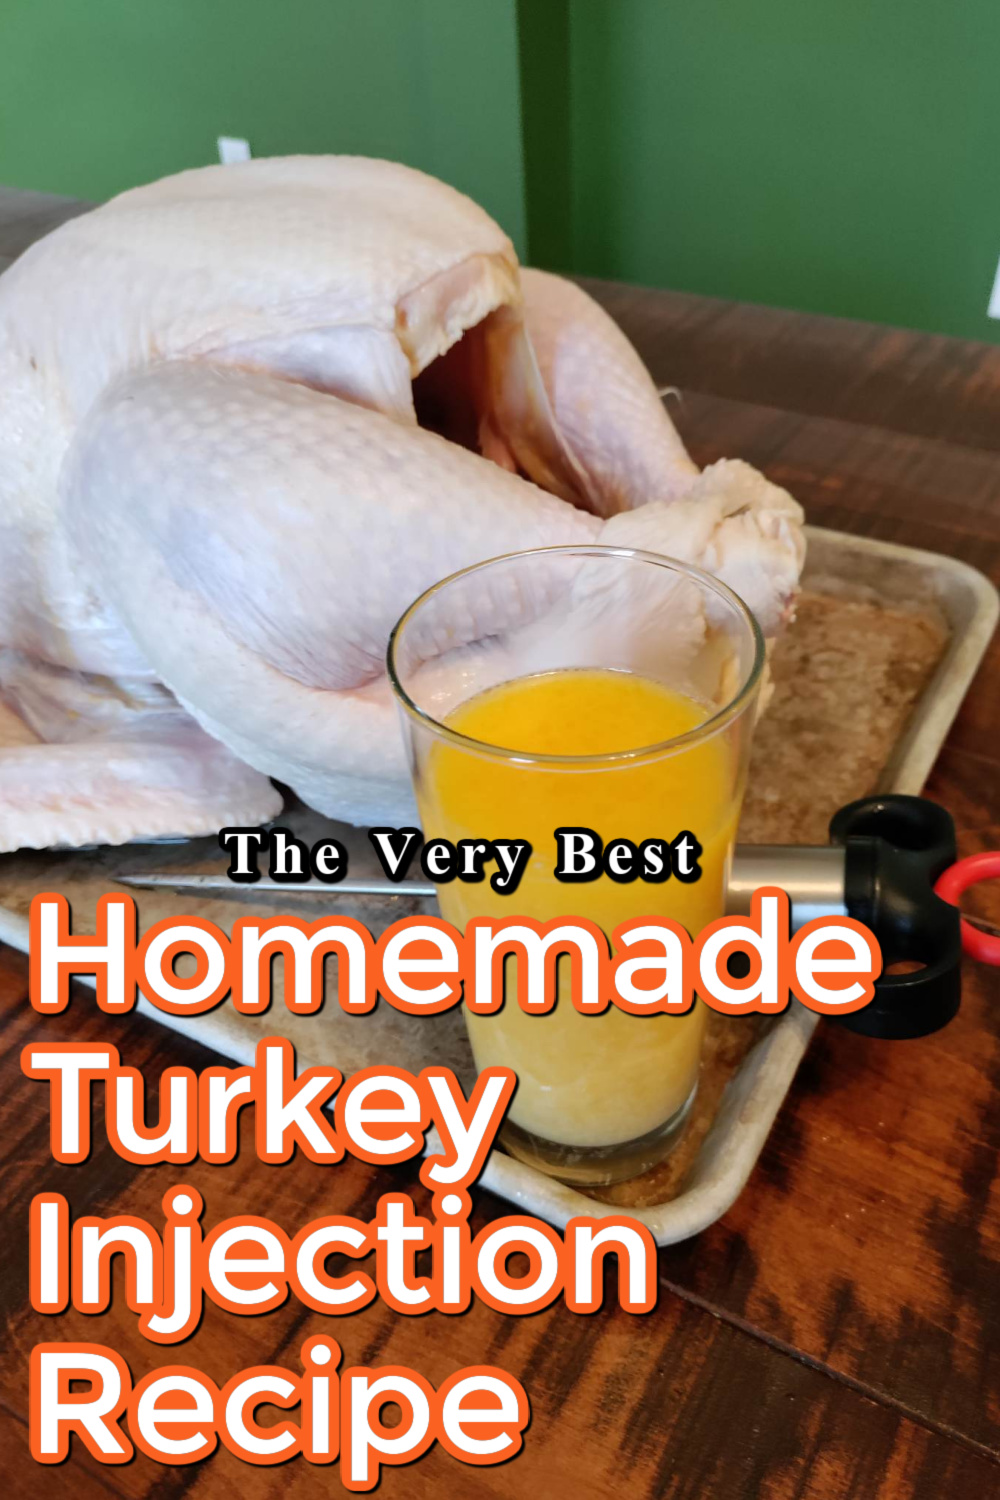 a raw turkey with a homemade turkey injection recipe sitting next to it with a text overlay that says "the very best homemade turkey injector recipe"